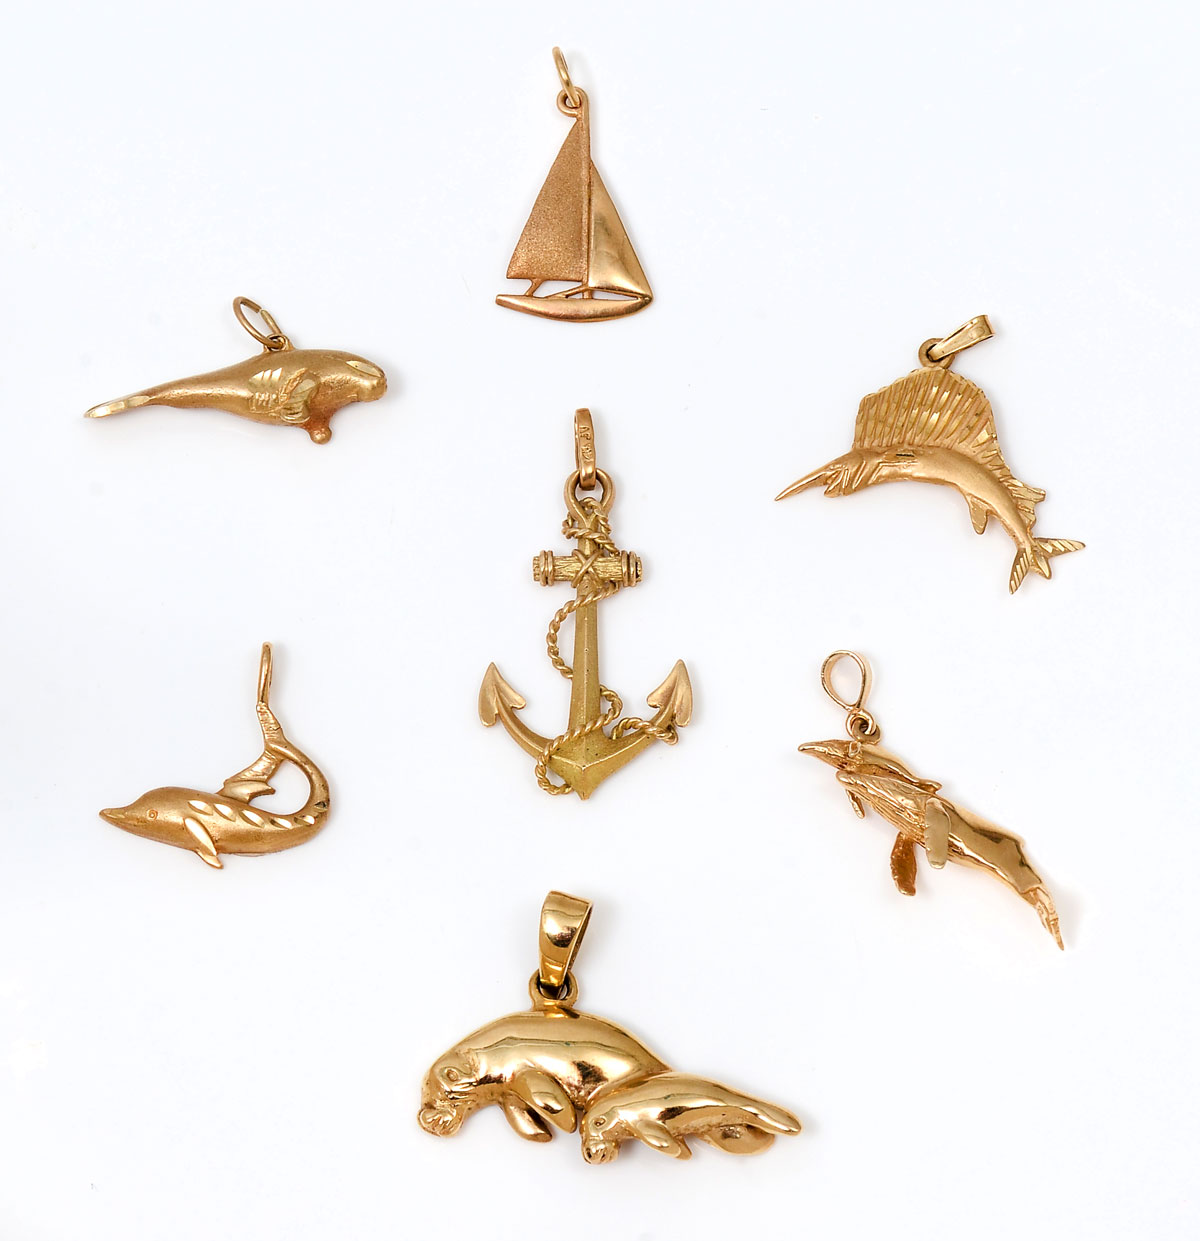 7 SEA CREATURE CHARMS IN 14K: 7